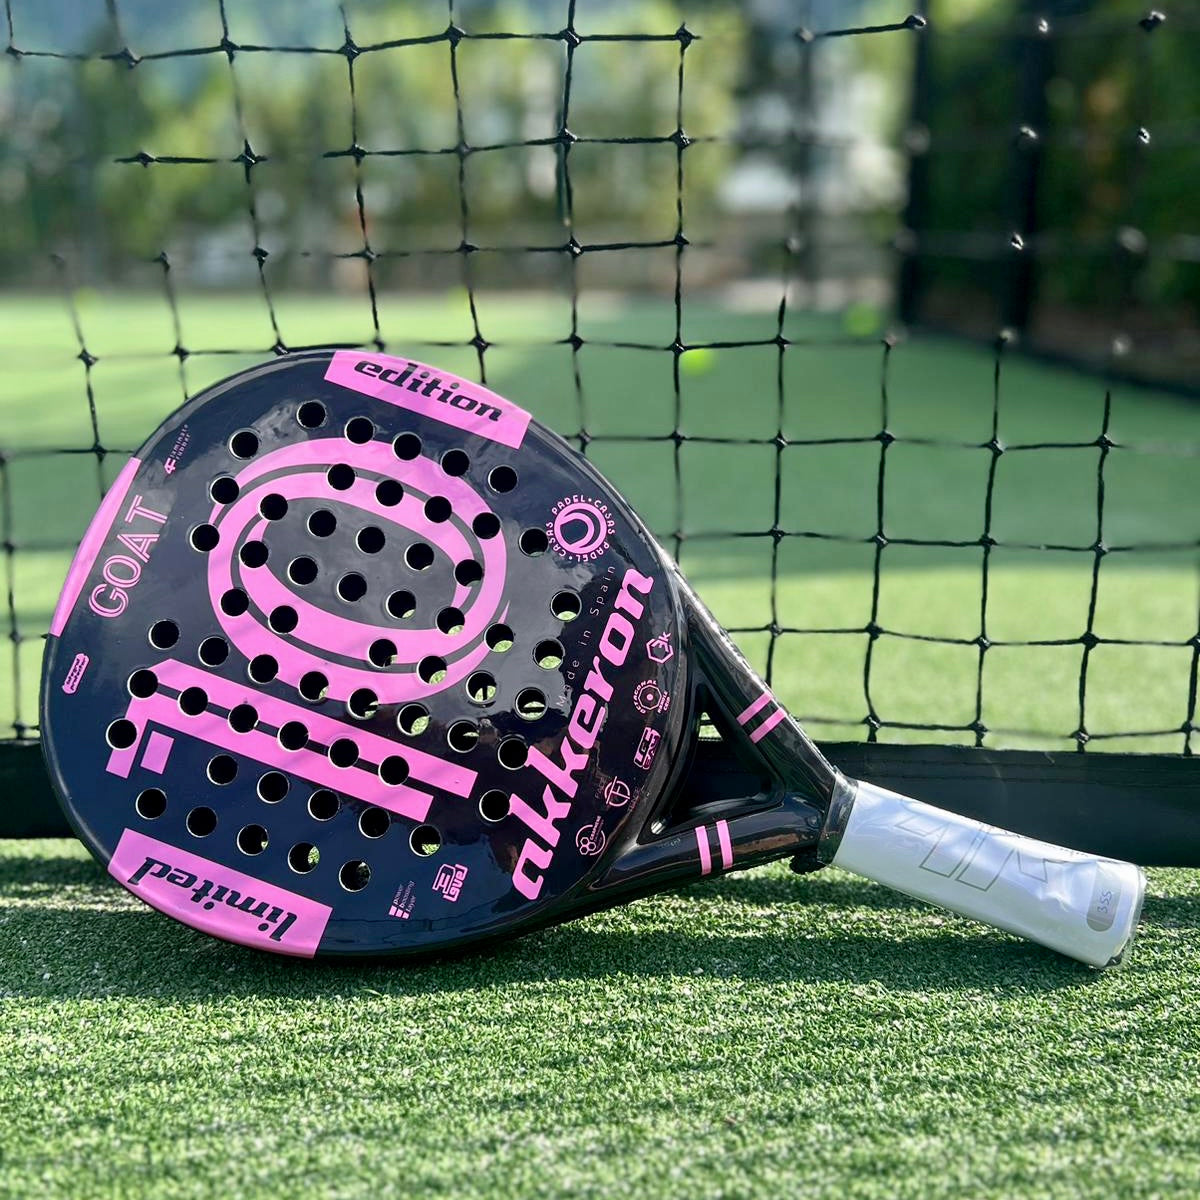 GOAT Padel Racket Limited Edition by Casas Padel